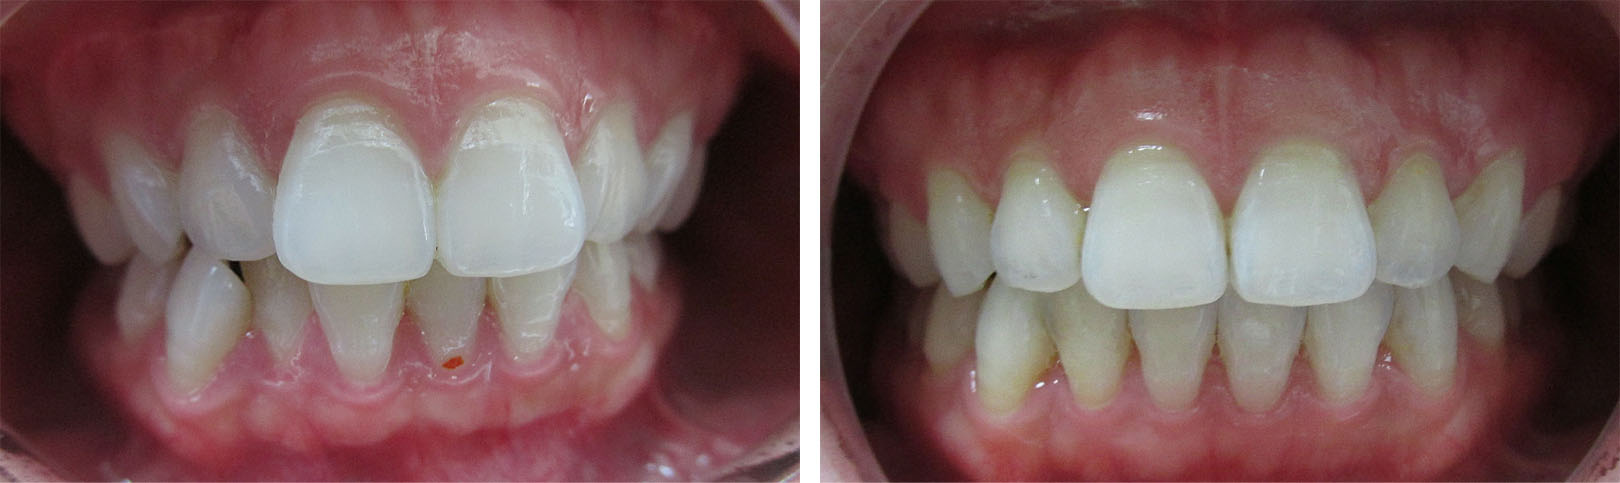 Before and After Invisalign Photo